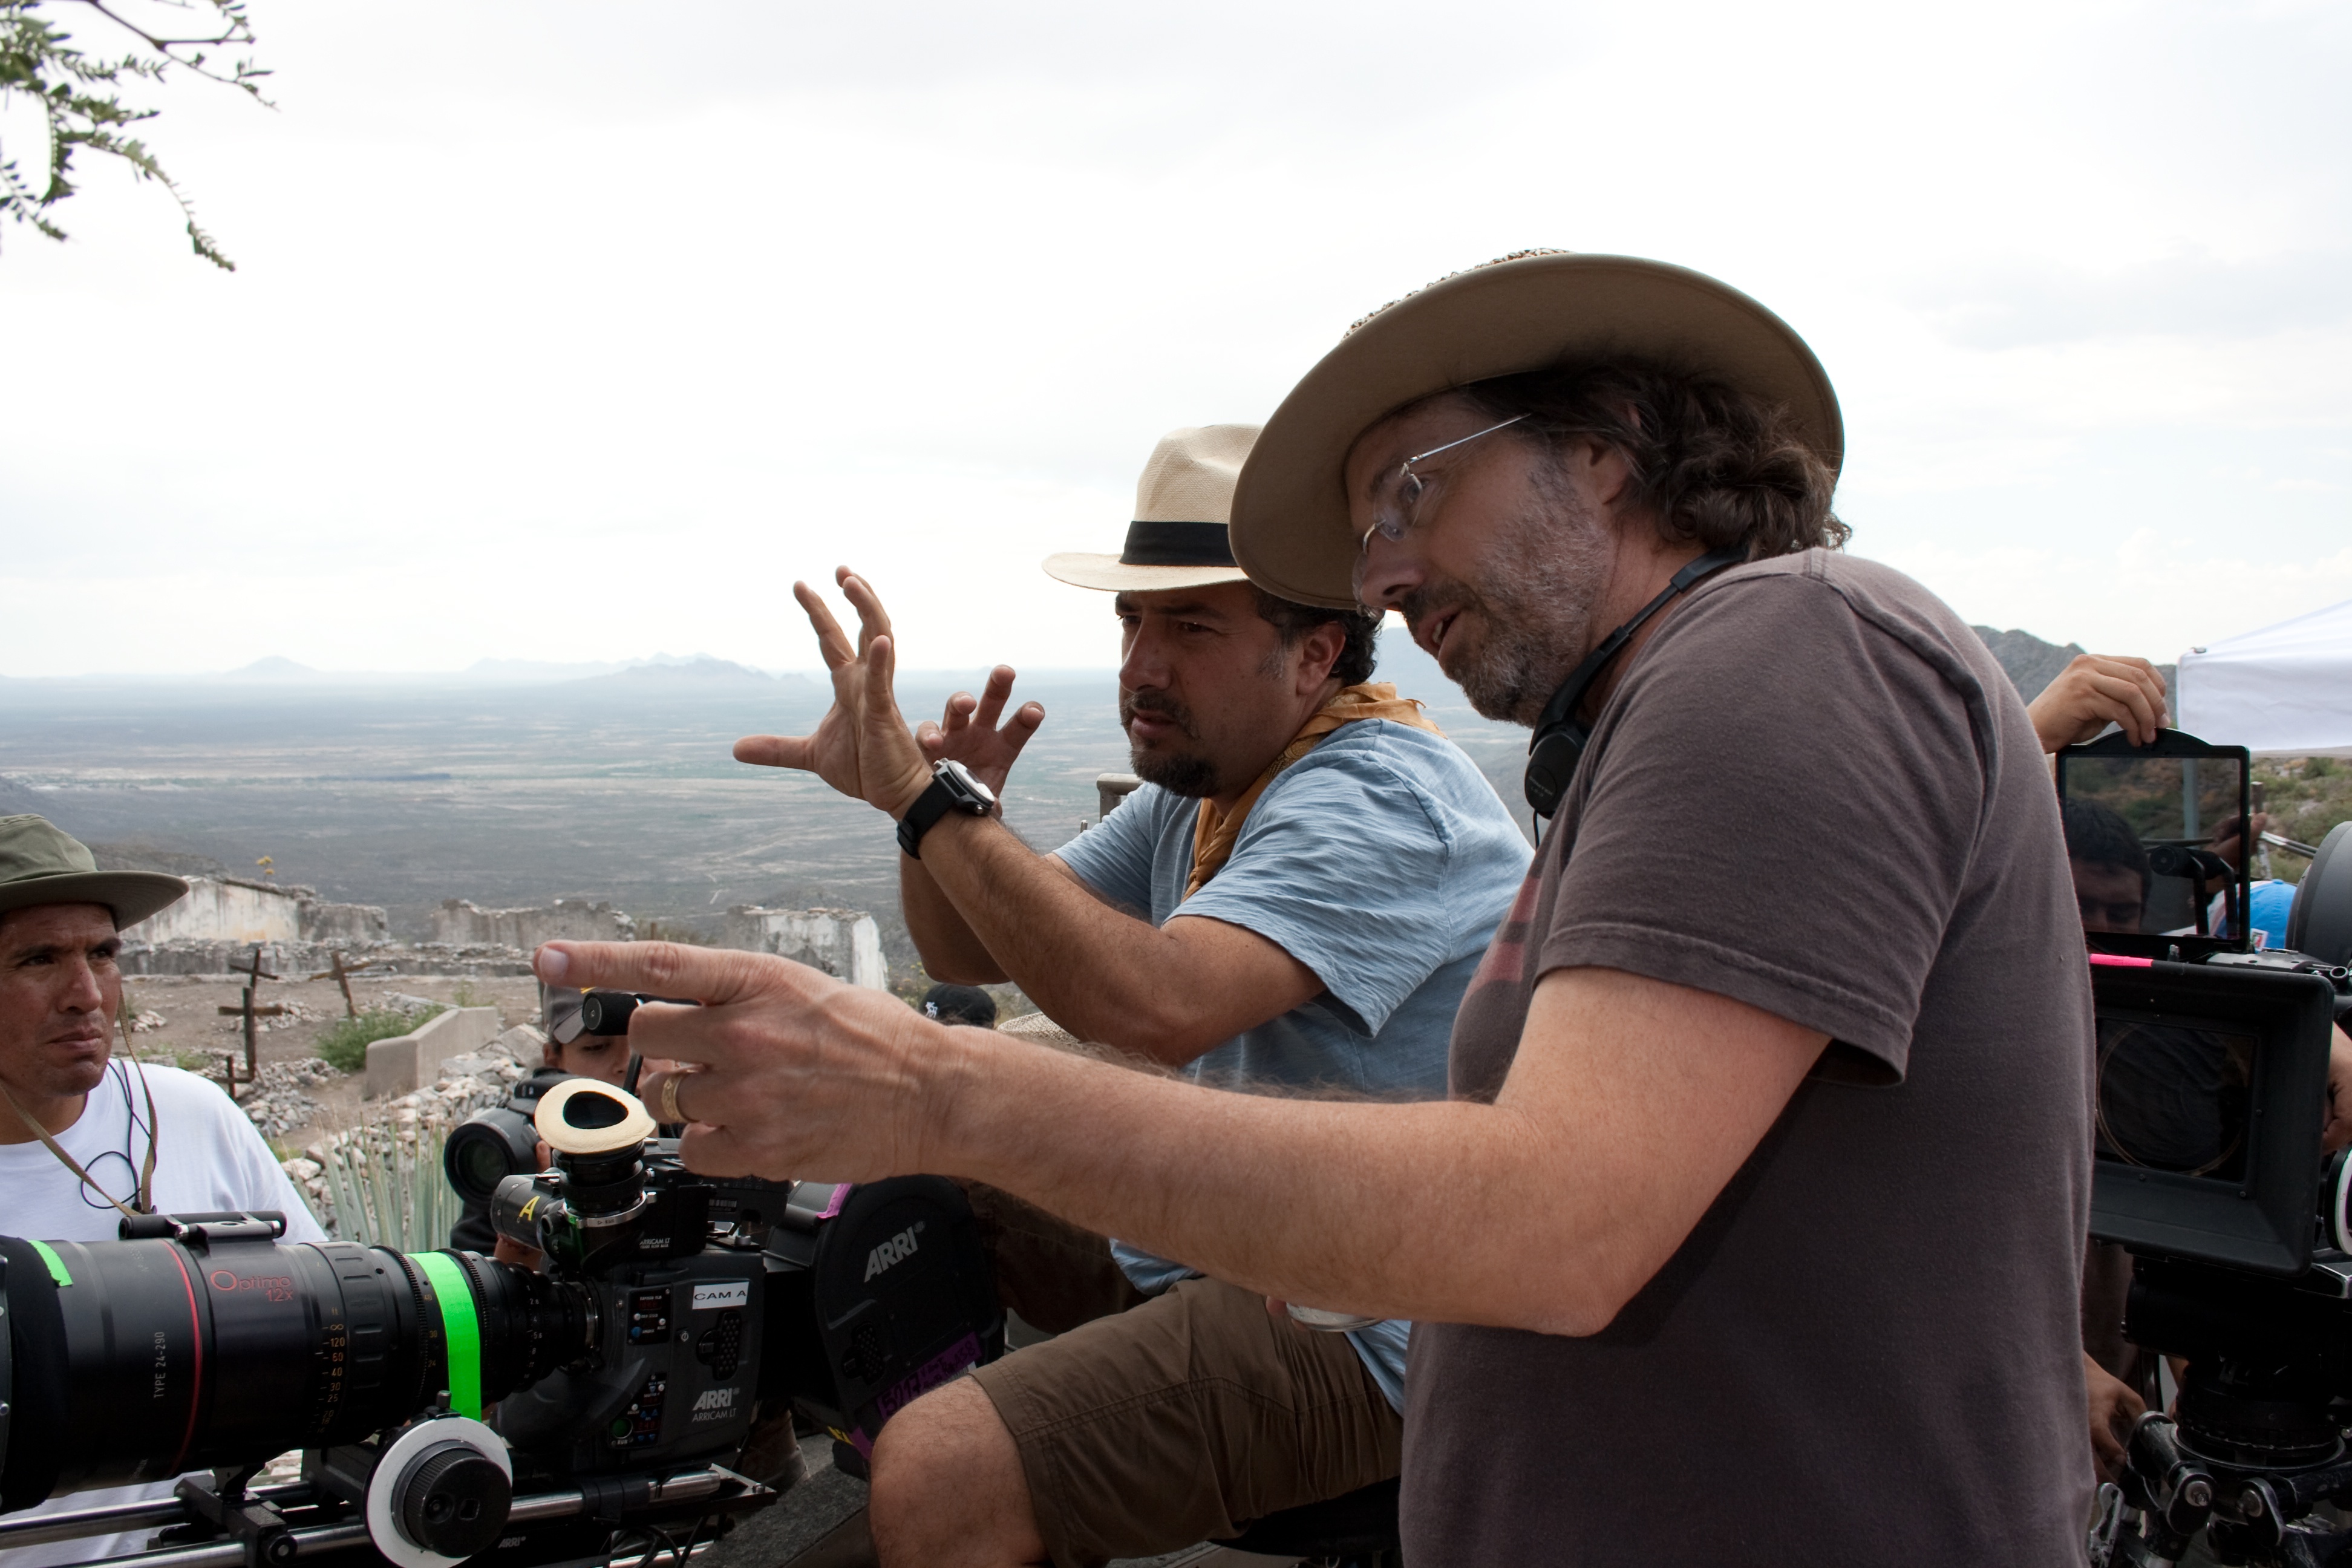 On the set of FOR GREATER GLORY with Cinematographer Eduardo Martínez Solares